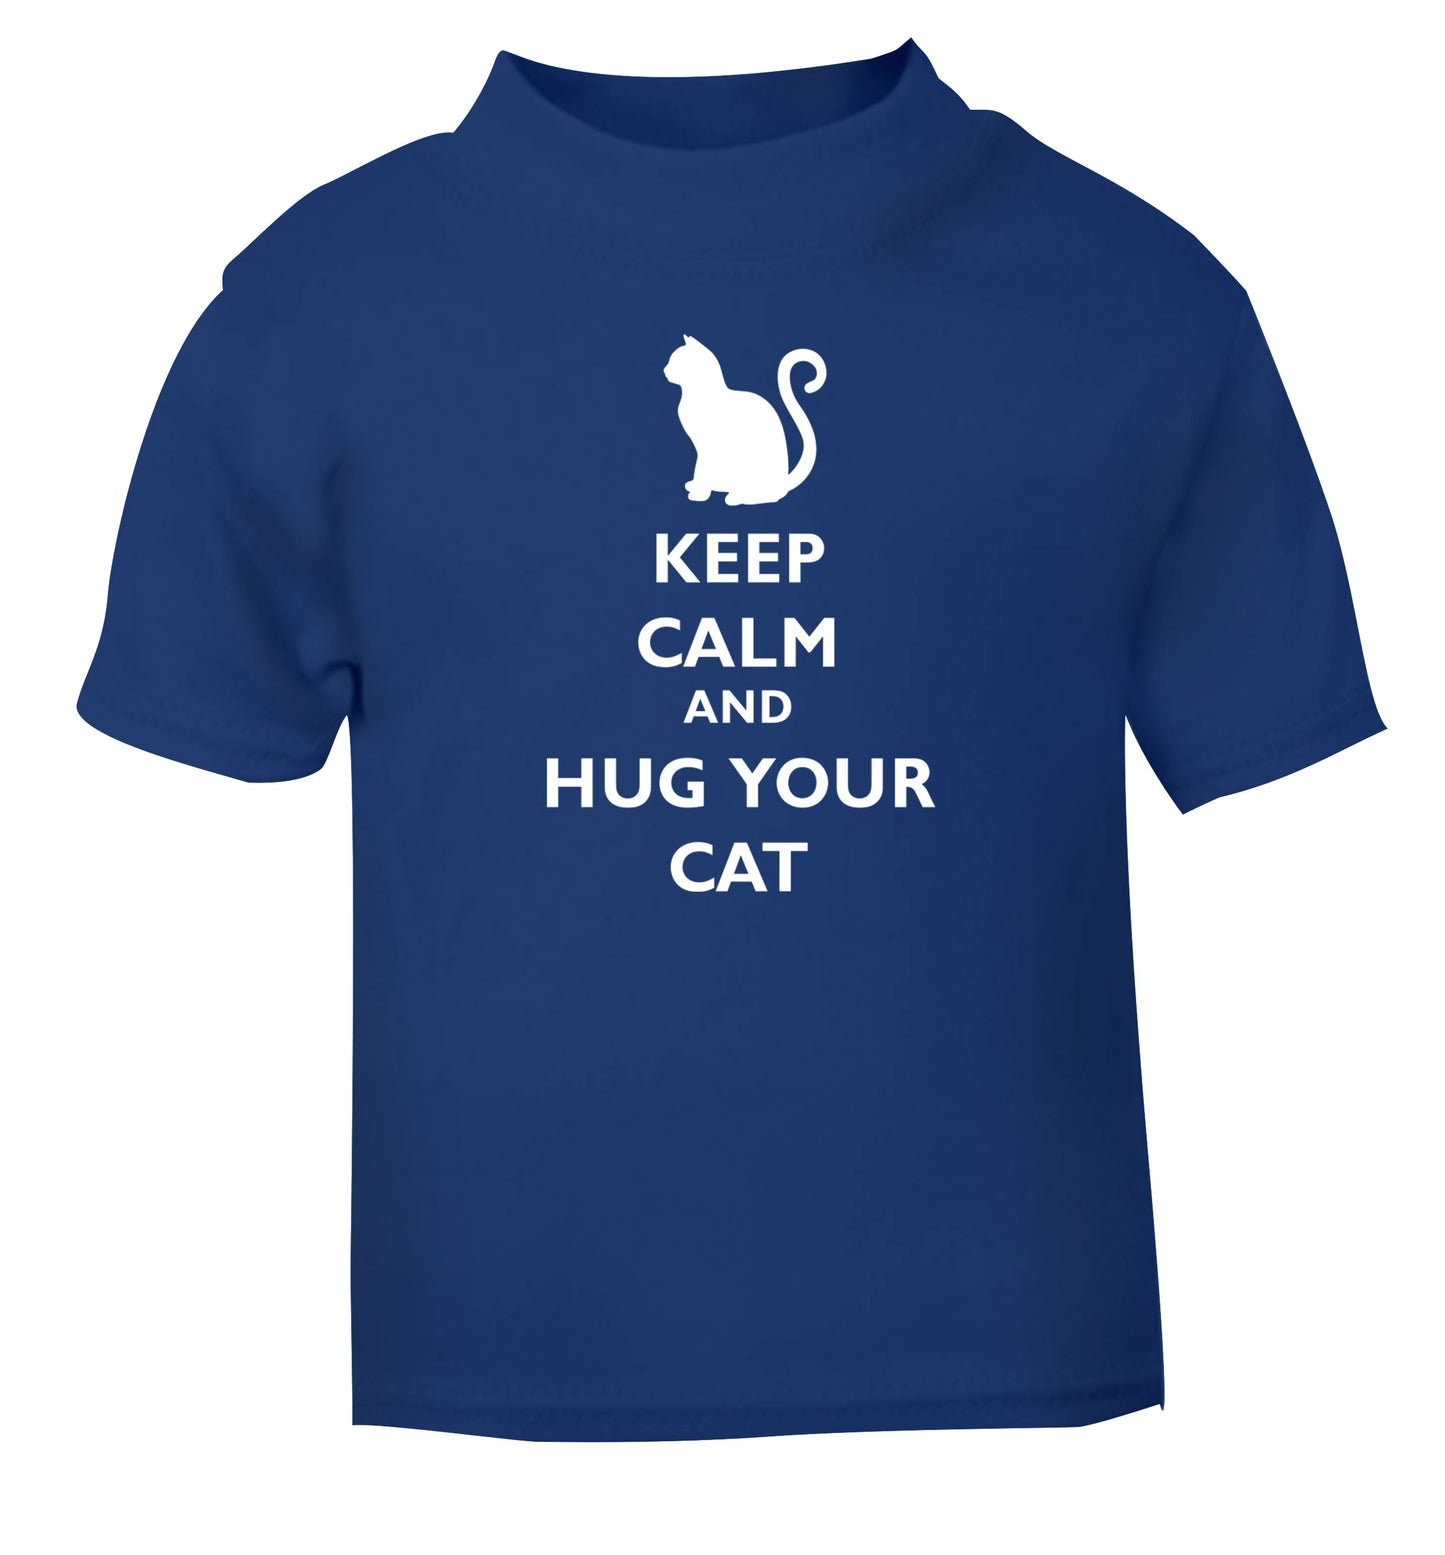 Keep calm and hug your cat blue Baby Toddler Tshirt 2 Years